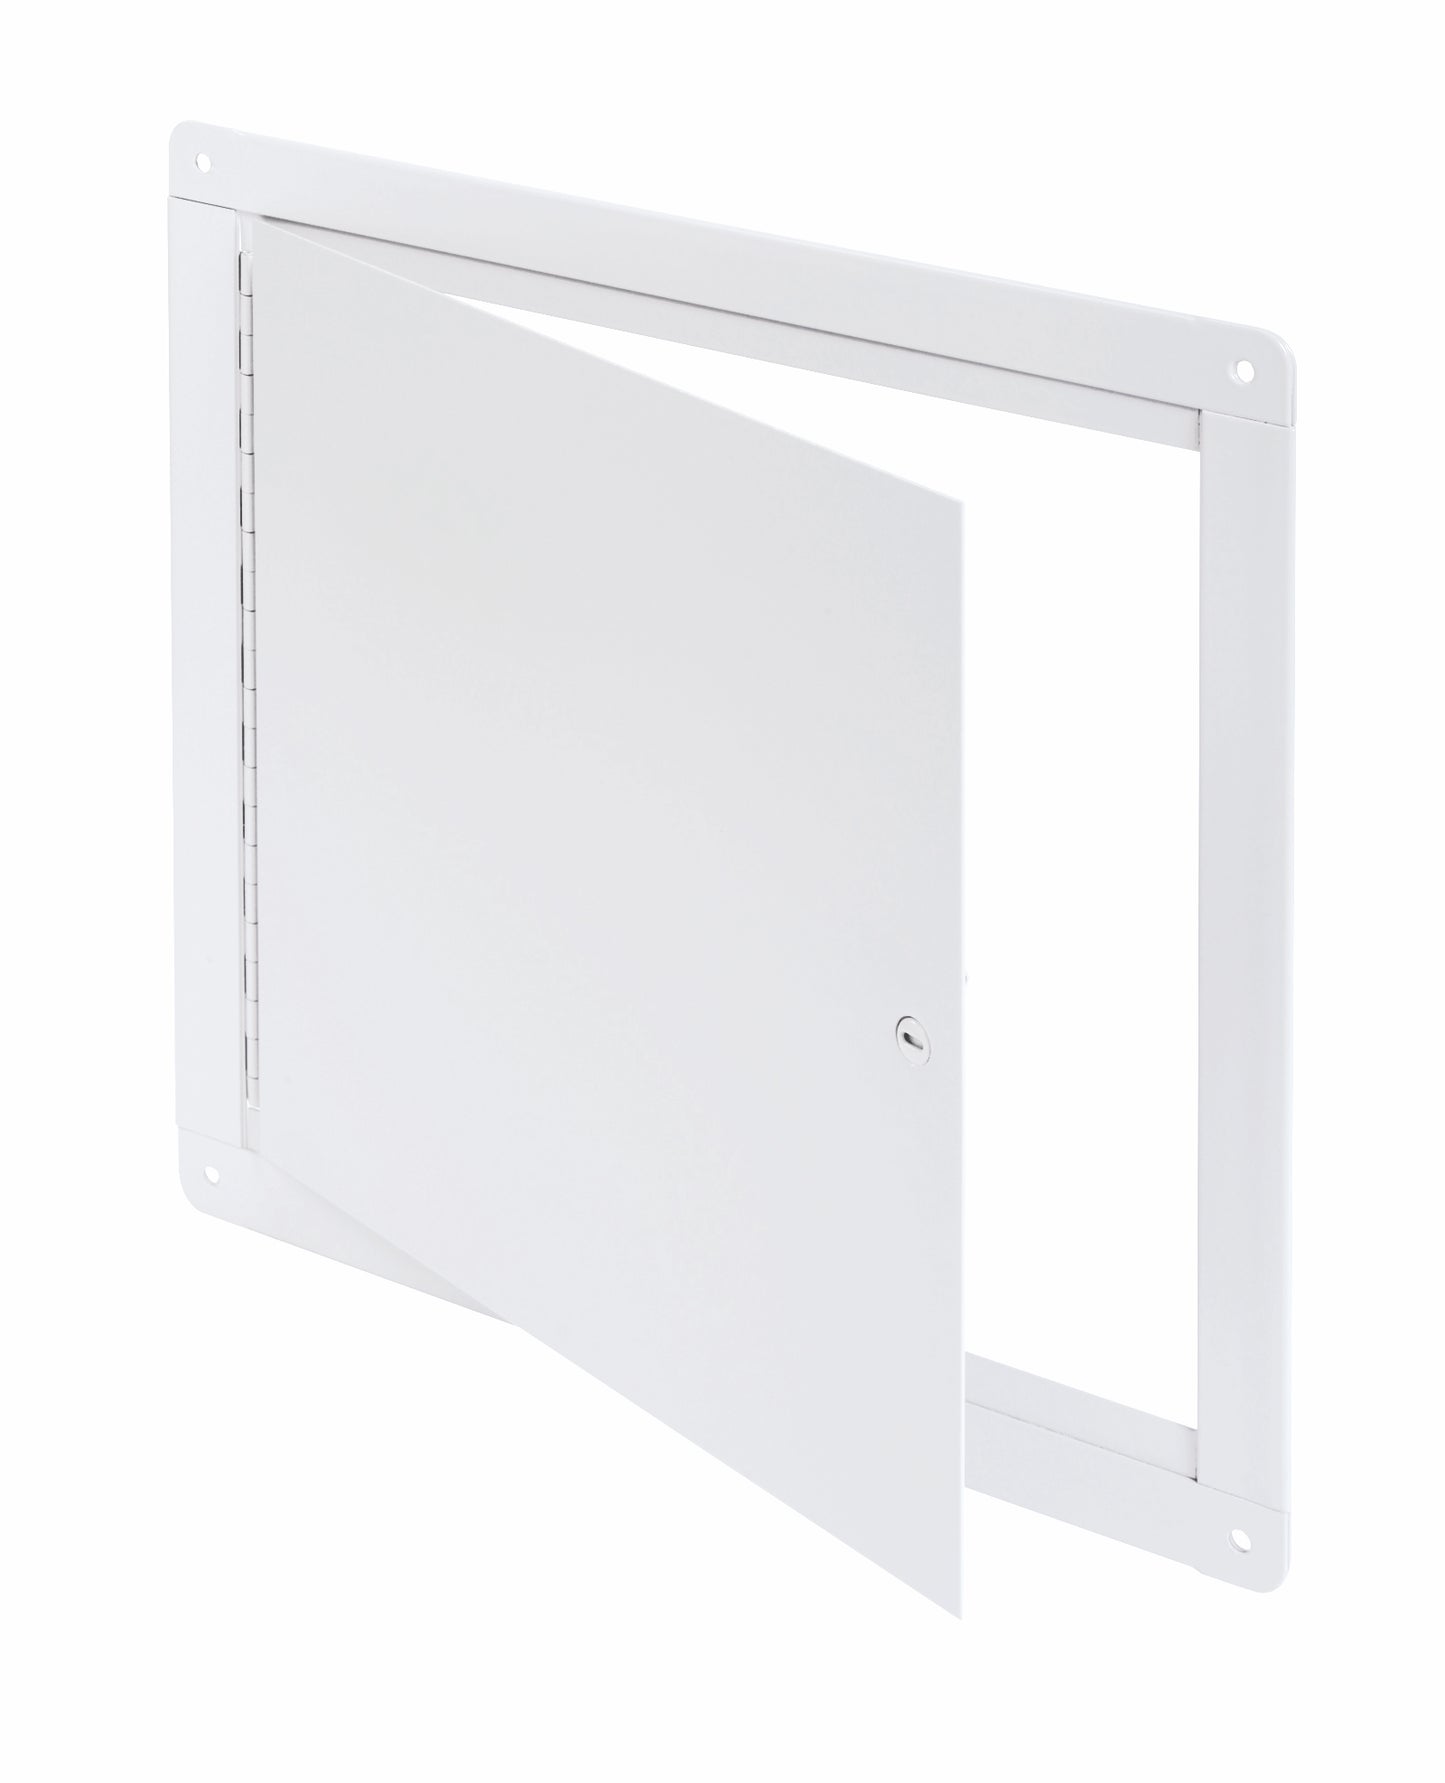 12"x12" Flush Universal Surface Mounted Access Door with Exposed Flange, Cendrex